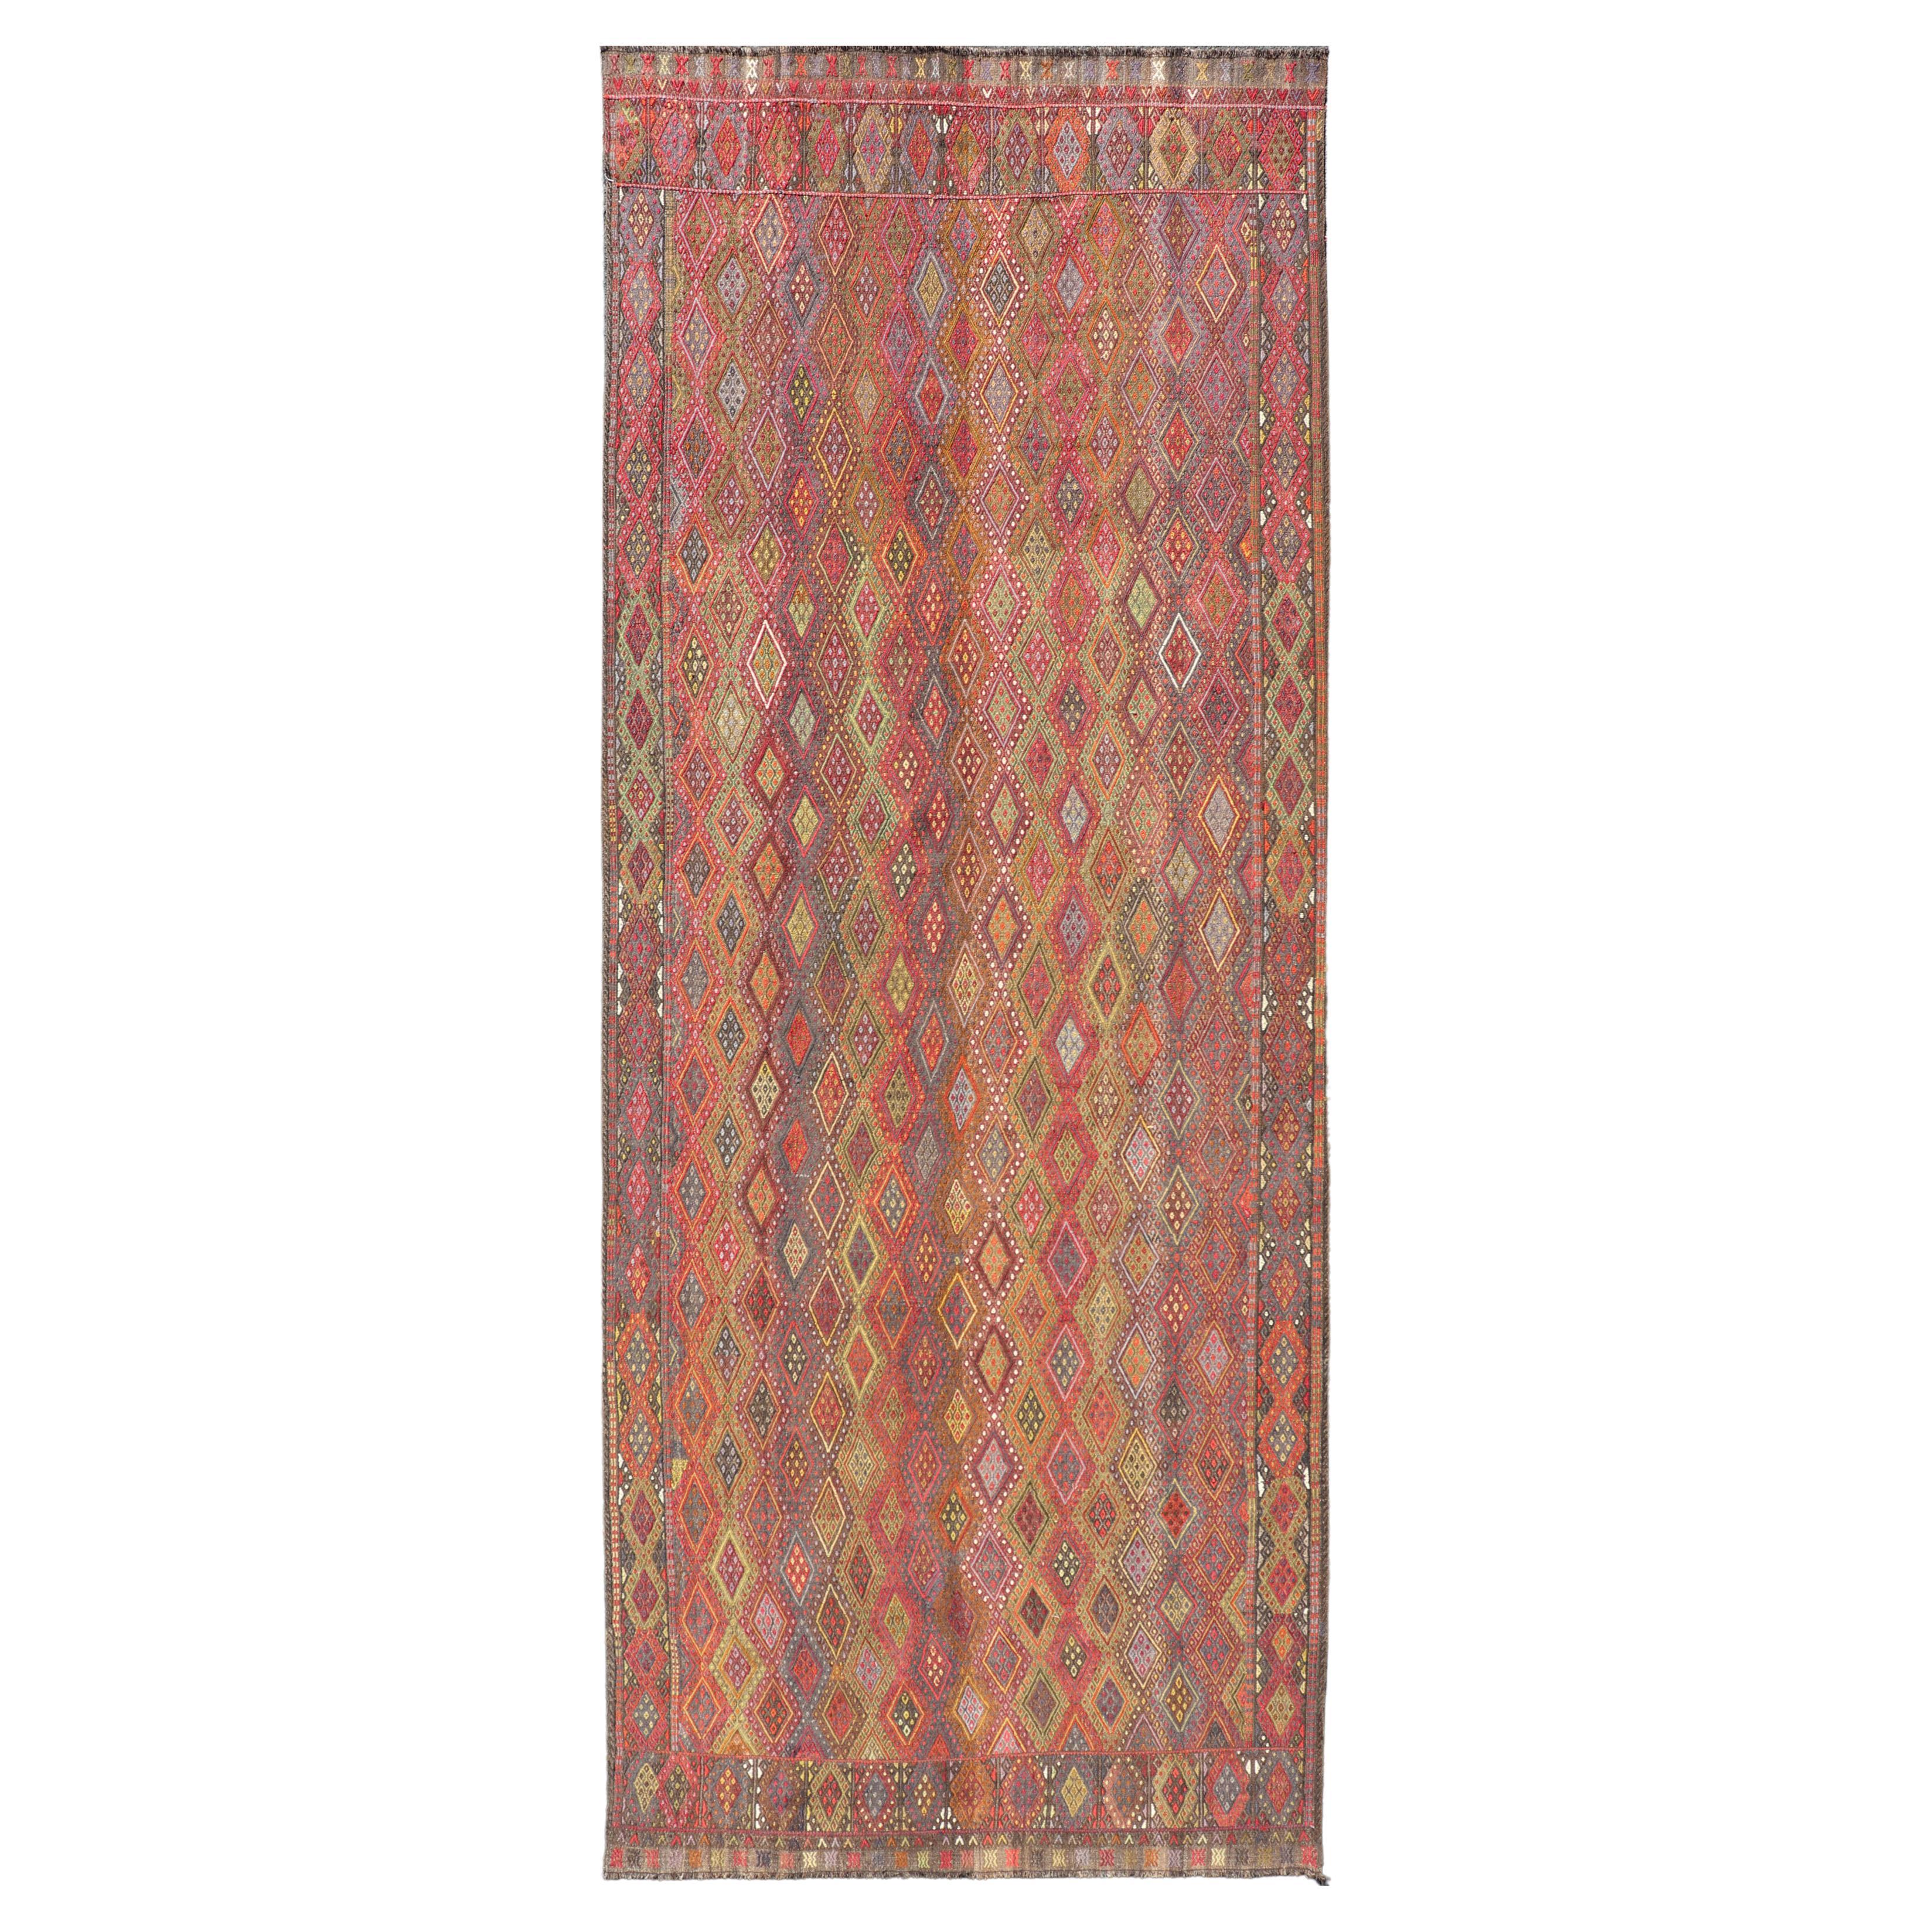 Vintage Turkish Gallery Kilim with All-Over Diamond Design in Multicolor